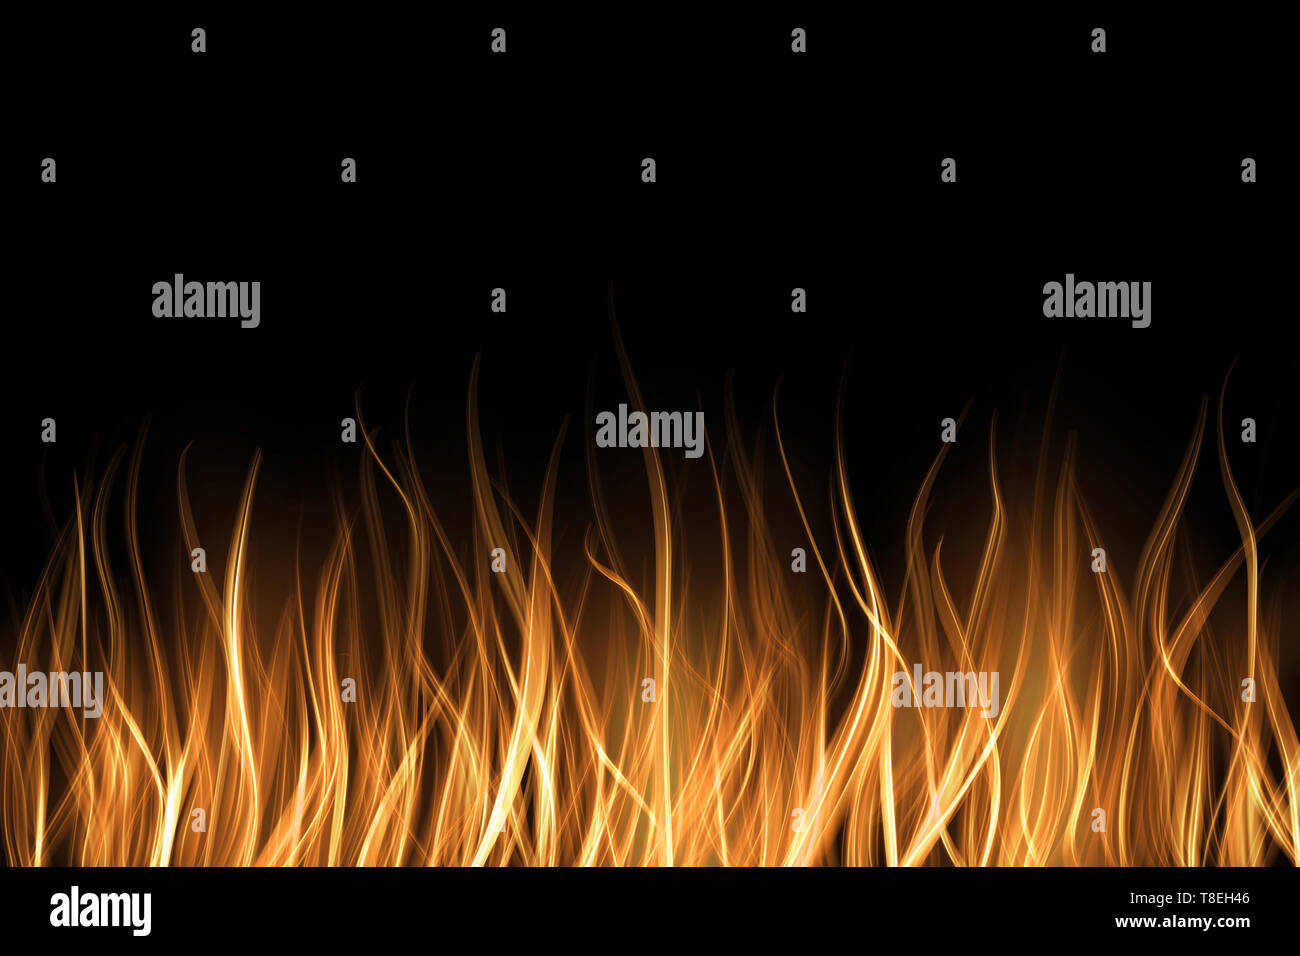 Abstract fire flame light on black background illustration.Realisctic Burning flames Stock Photo